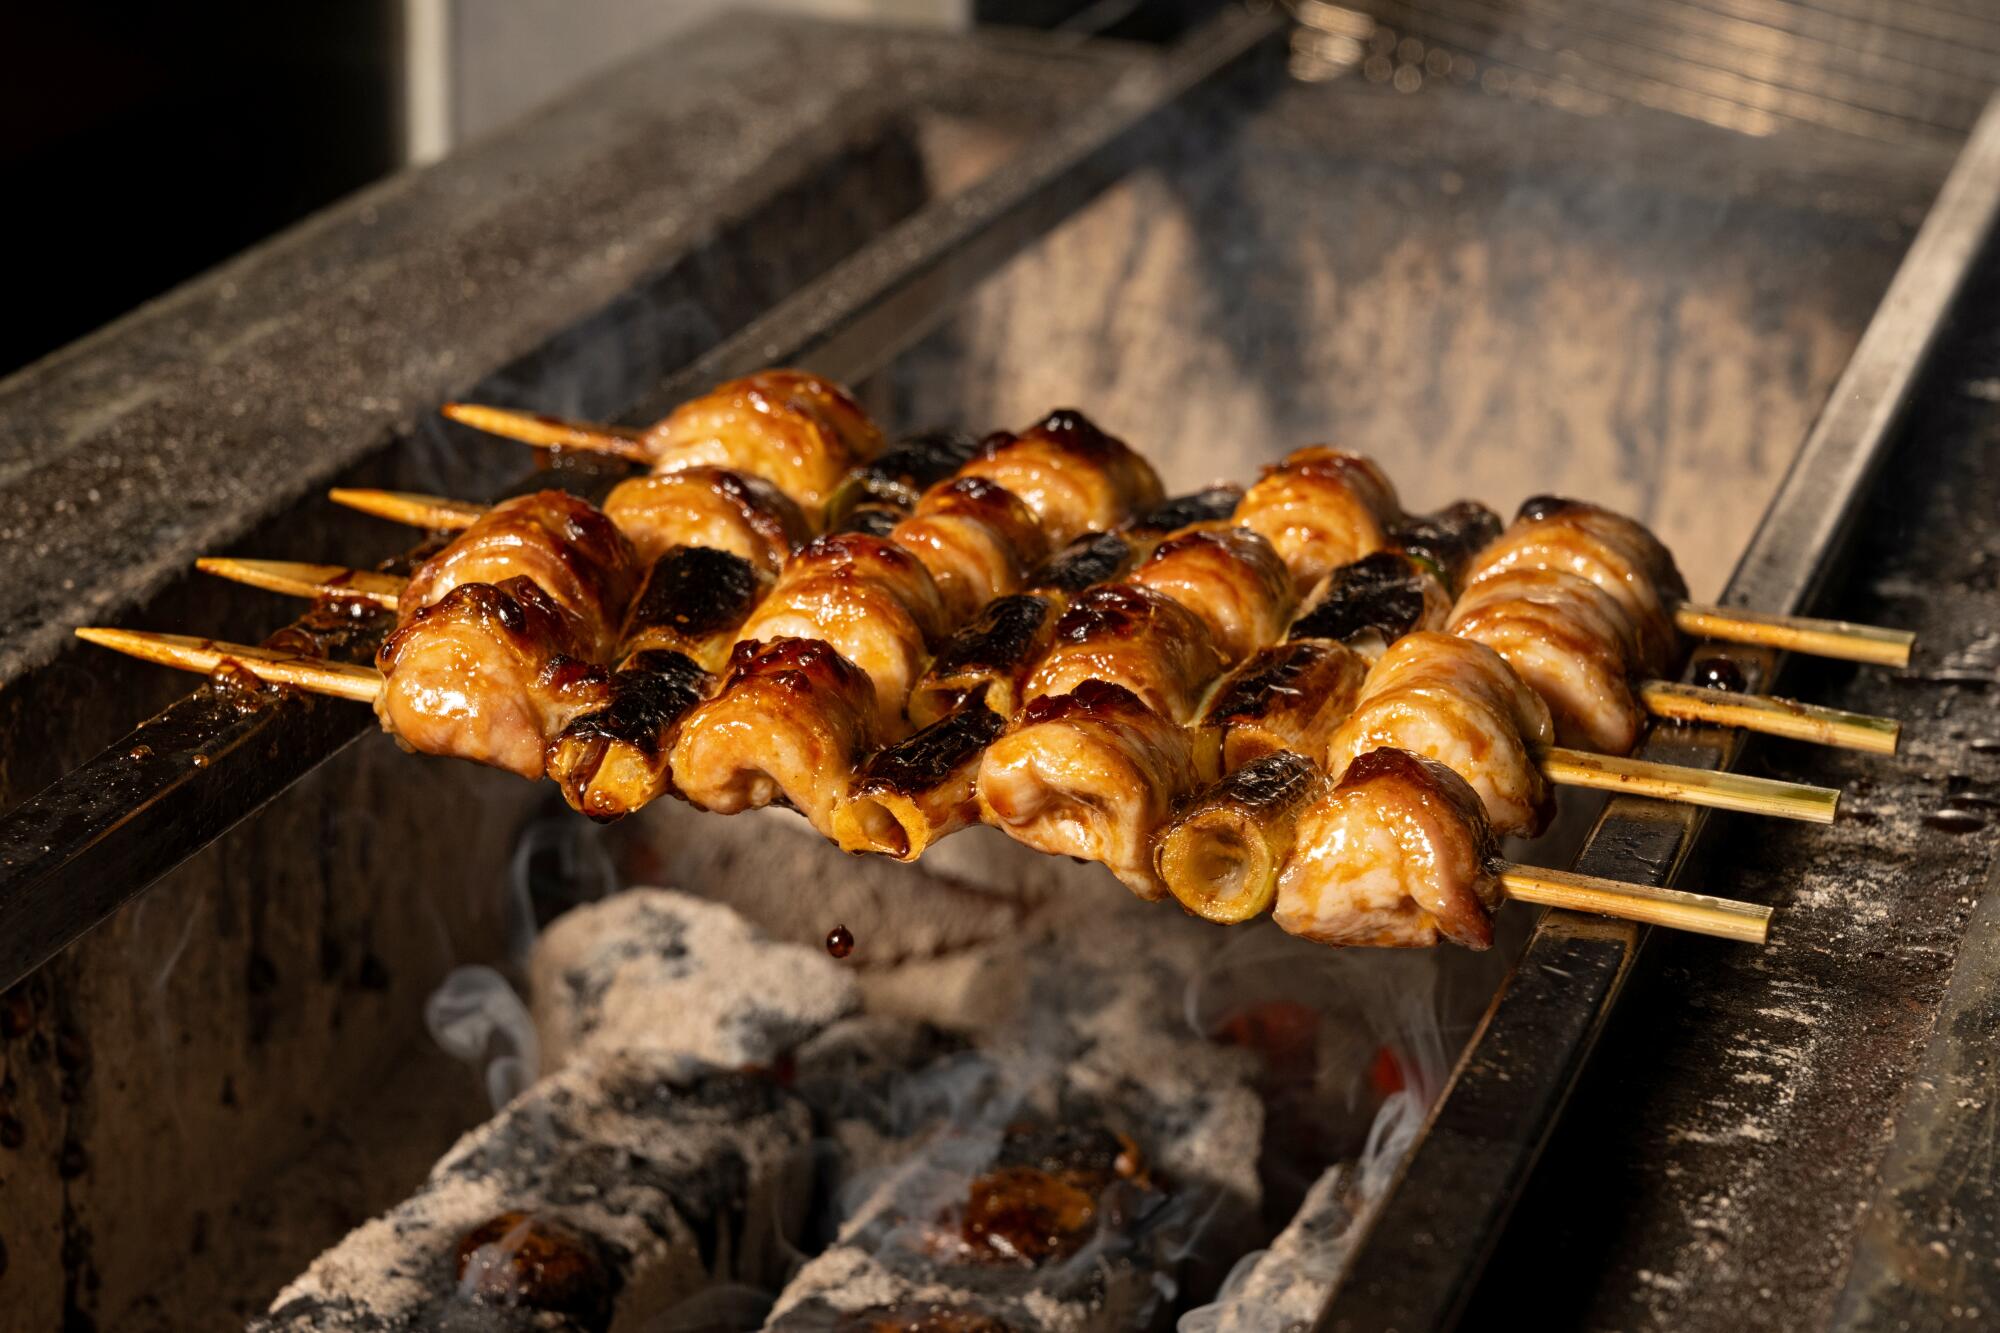 Chicken pieces on skewers on a charcoal grill